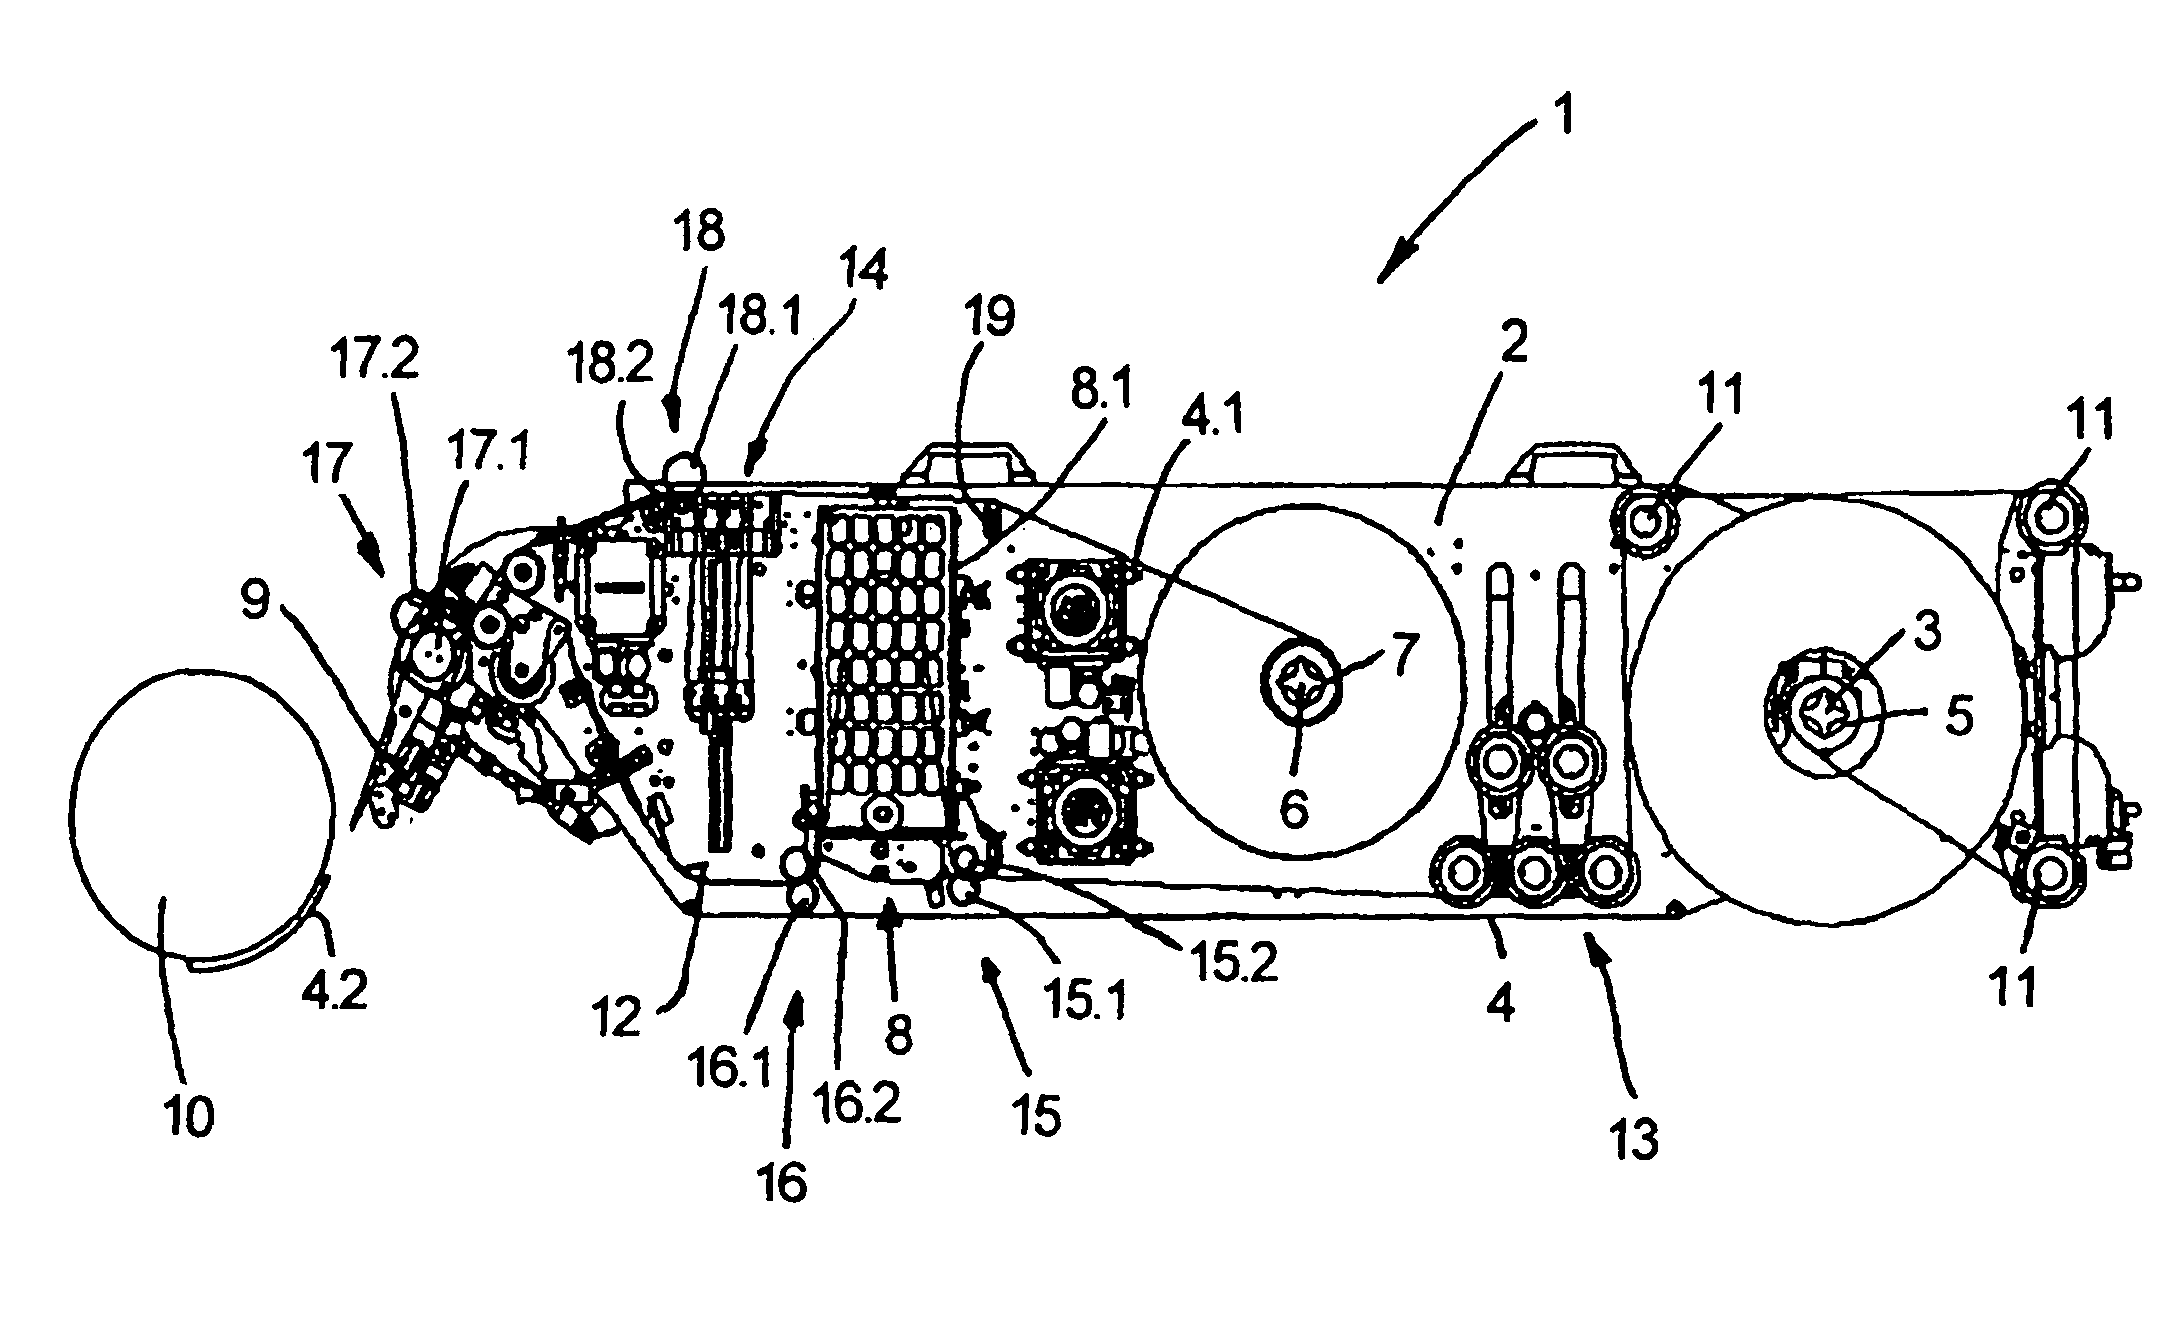 Device for dispensing labels, such as self-adhesive labels, on objects